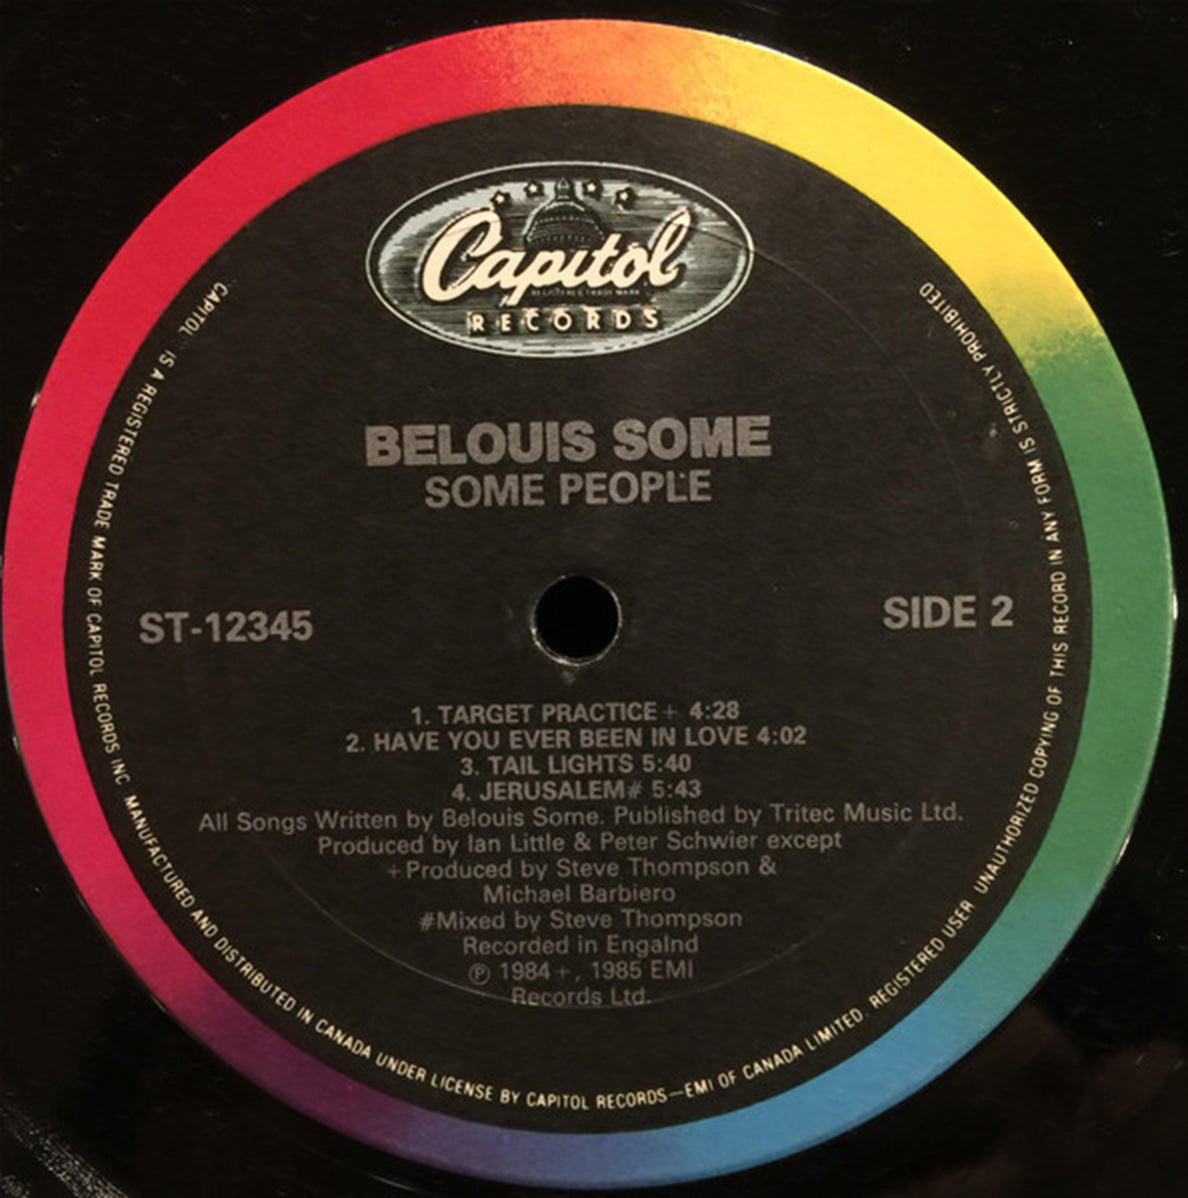 Belouis Some – Some People  - 1985